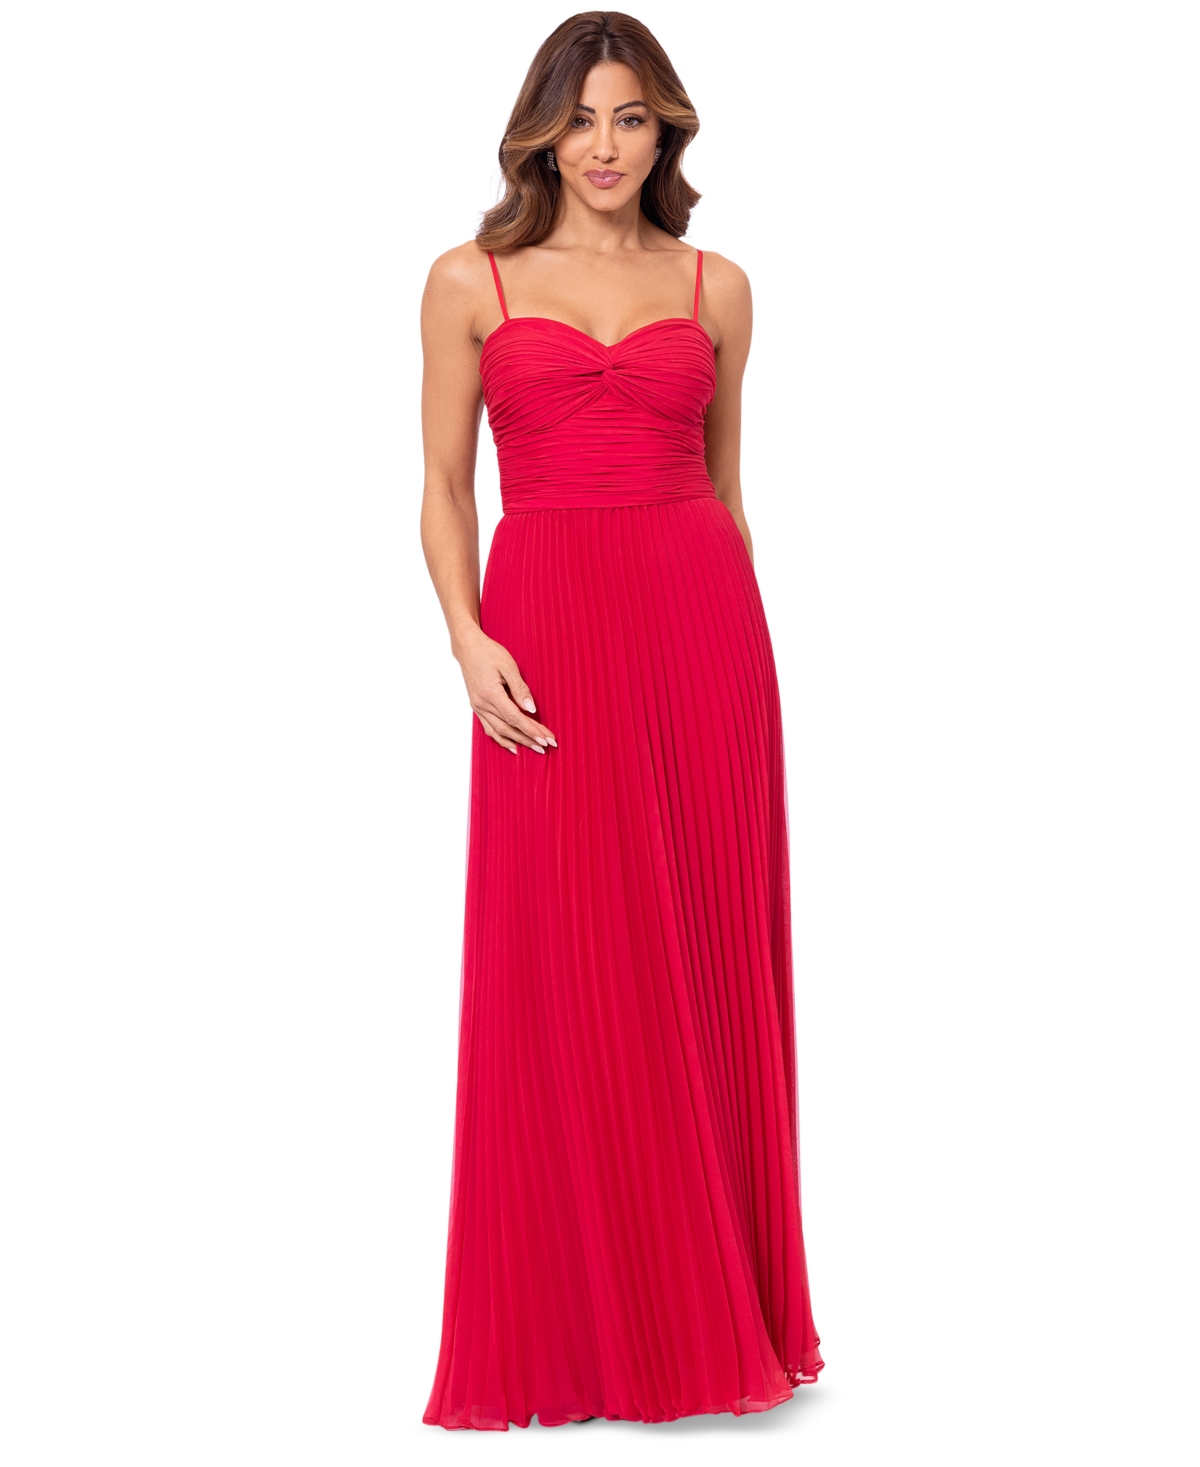 Women's Ruched Pleated Gown - Watermelon